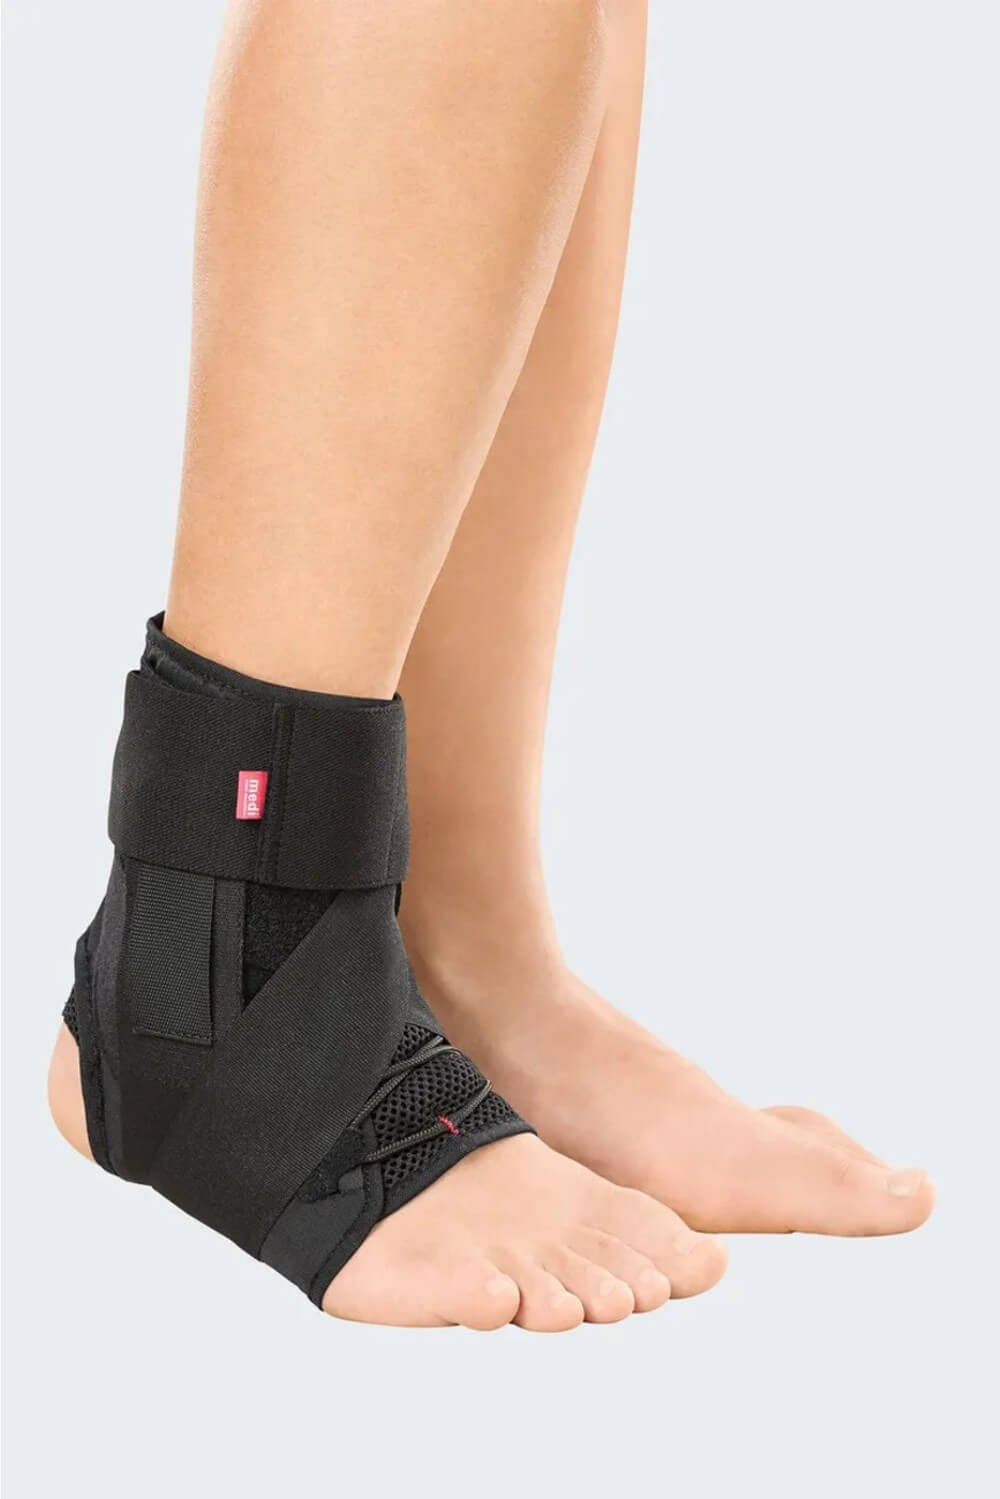 Mueller 4-Way Ankle Support with Removable Strap Small/Medium